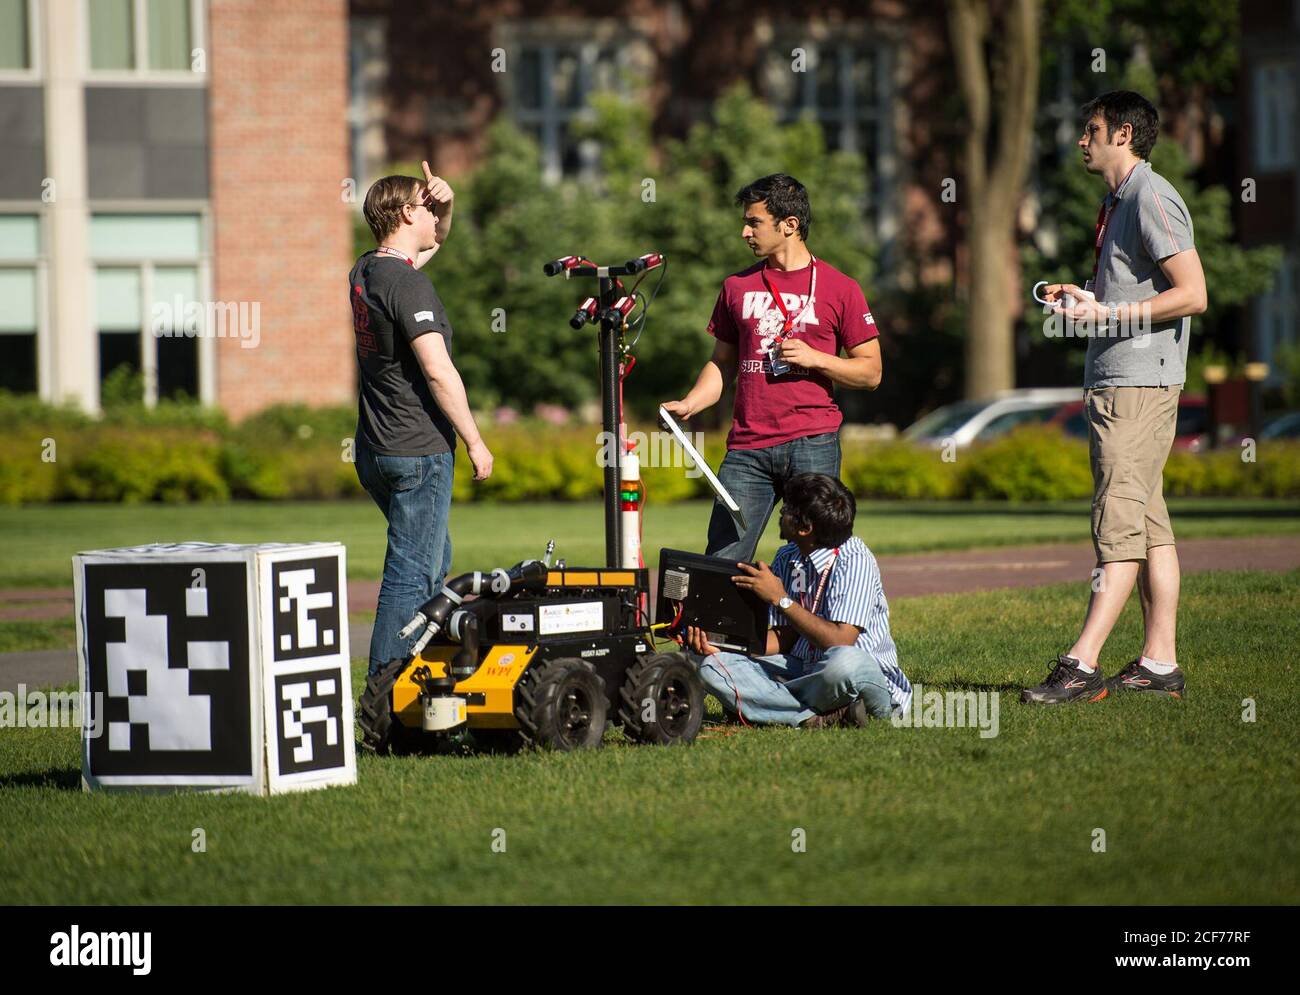 Members of the Worcester Polytechnic Institute (WPI) team AERO (Autonomous Exploration RObot) work on their robot in the practice field during the NASA 2013 Sample Return Robot Challenge, Tuesday, June 4, 2013, at the Worcester Polytechnic Institute (WPI) in Worcester, Mass. The AERO team is one of eleven teams competing for a $1.5 million NASA prize purse. Teams will be required to demonstrate autonomous robots that can locate and collect samples from a wide and varied terrain, operating without human control. The objective of this NASA-WPI Centennial Challenge is to encourage innovations in Stock Photo